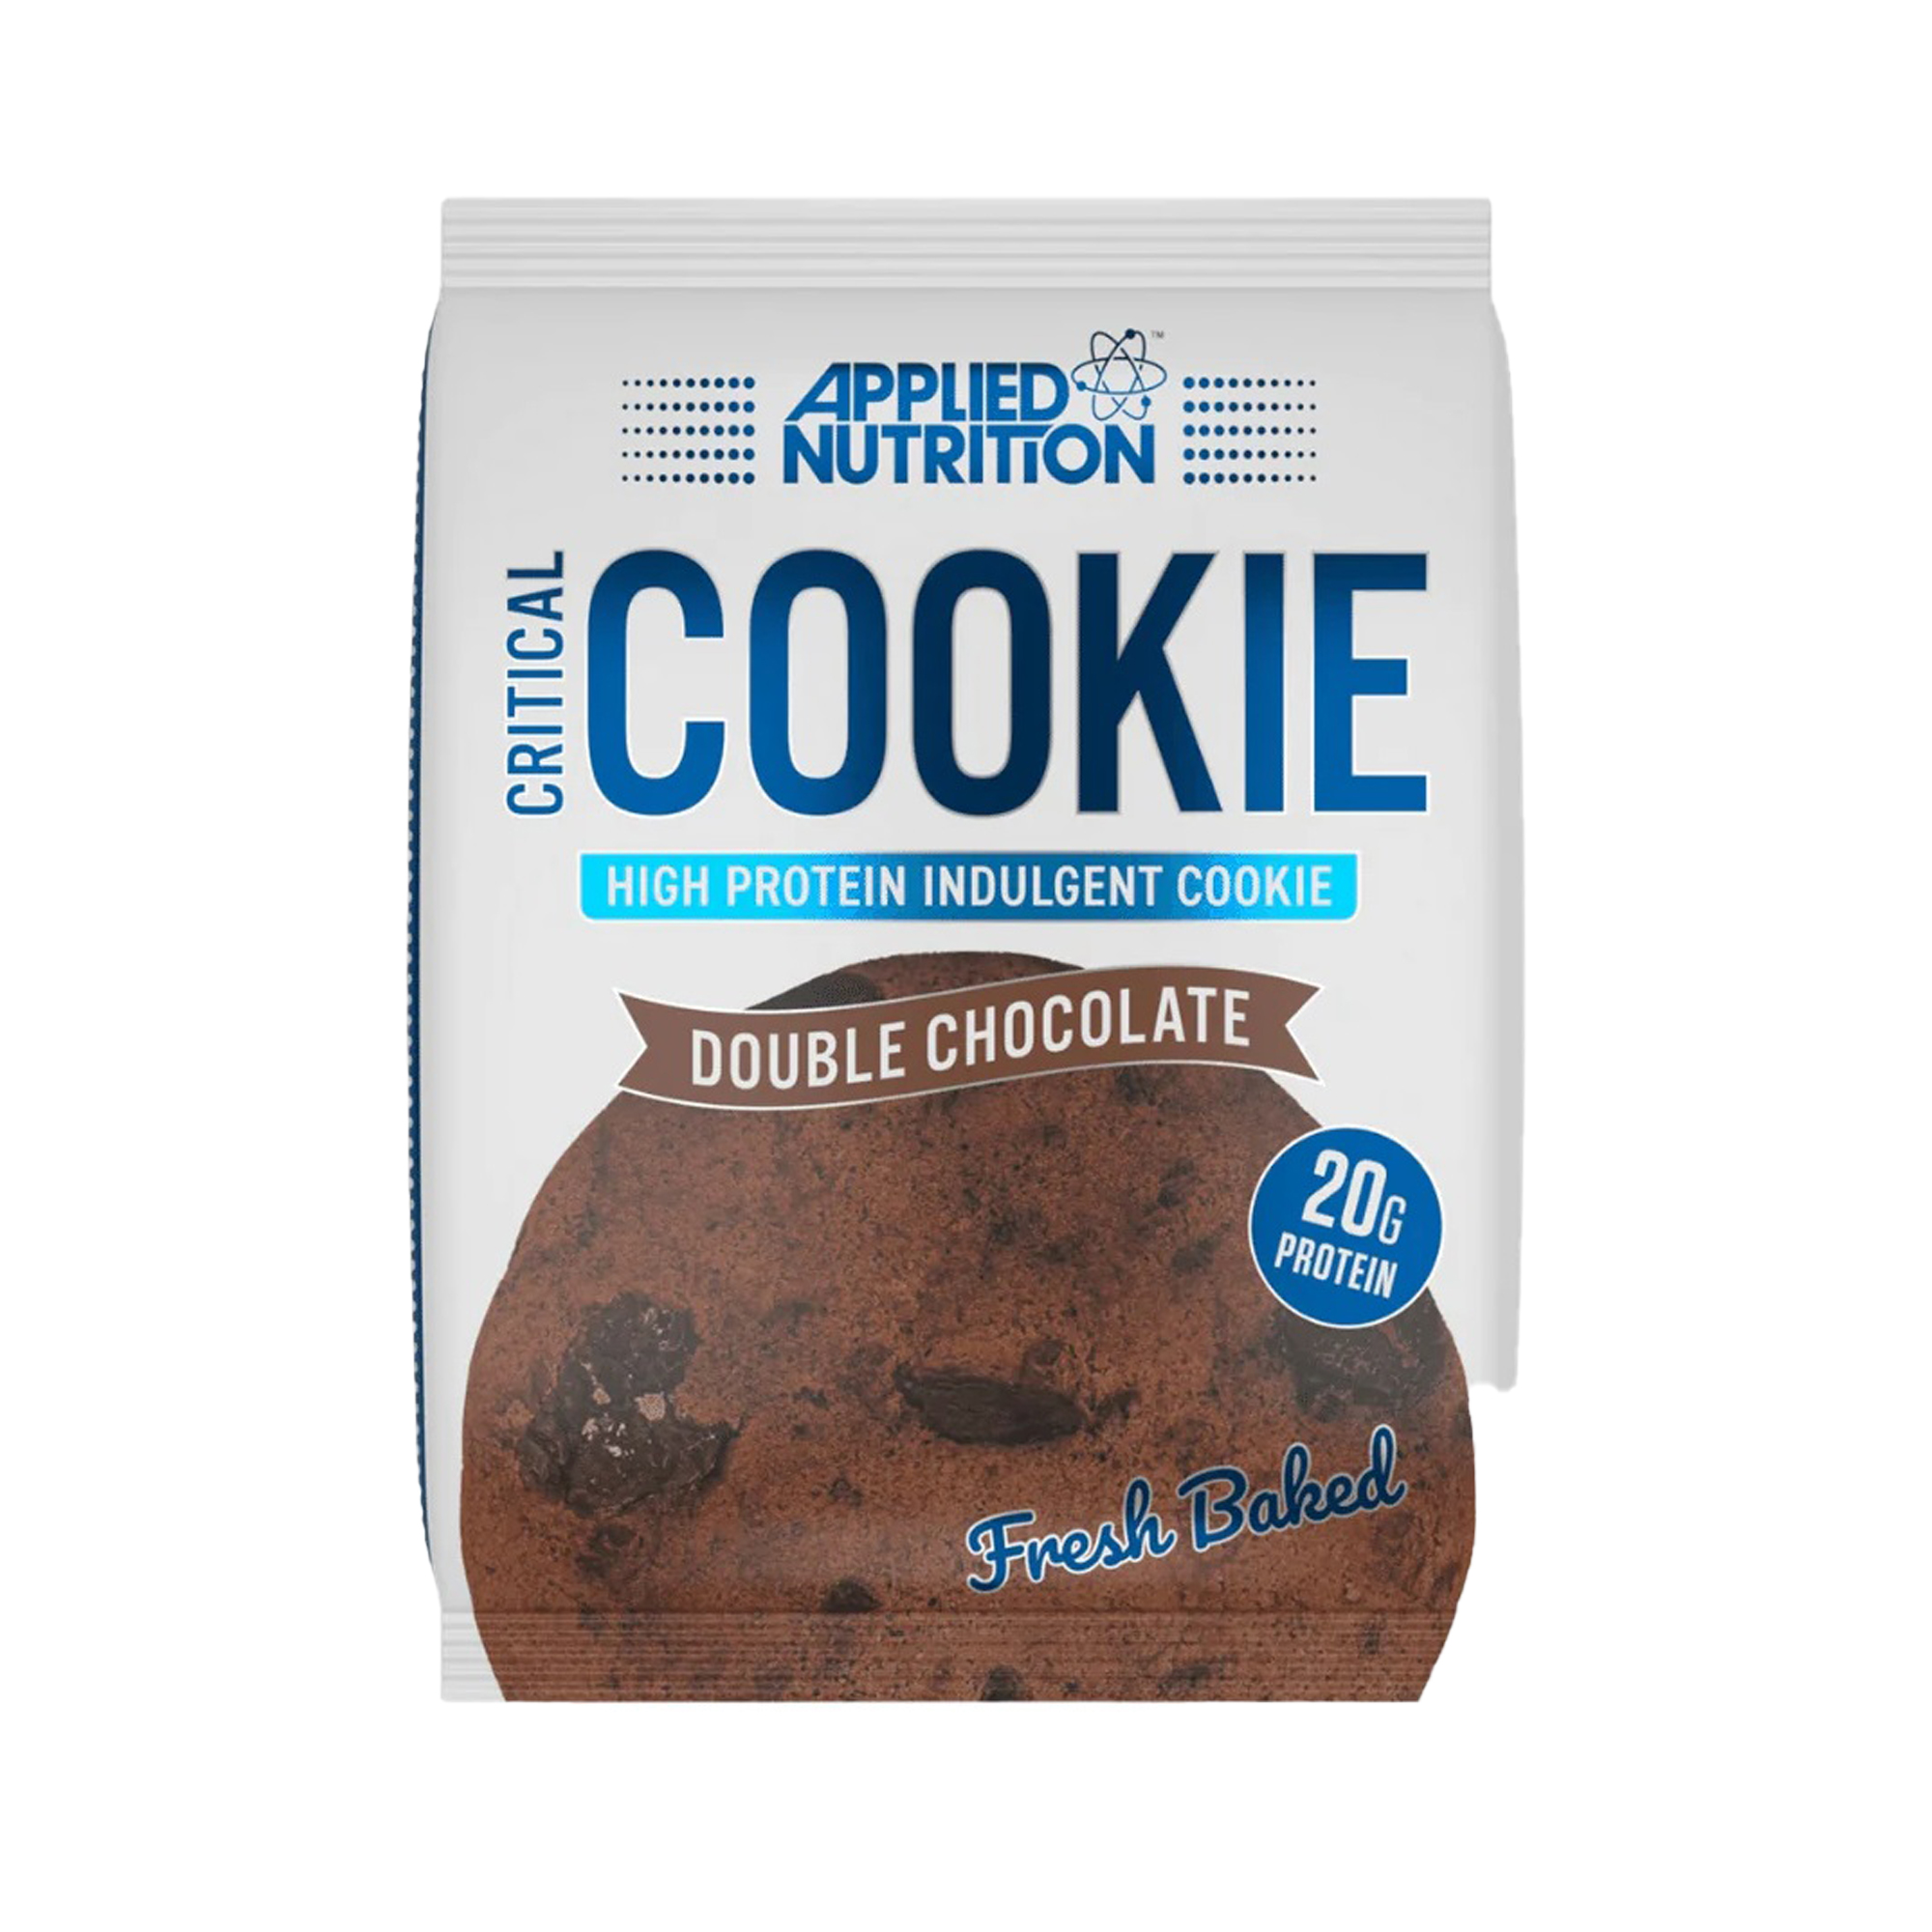 APPLIED NUTRITION PROTEIN CRITICAL COOKIE DOUBLE CHOCOLATE 85G 20G PROTEIN